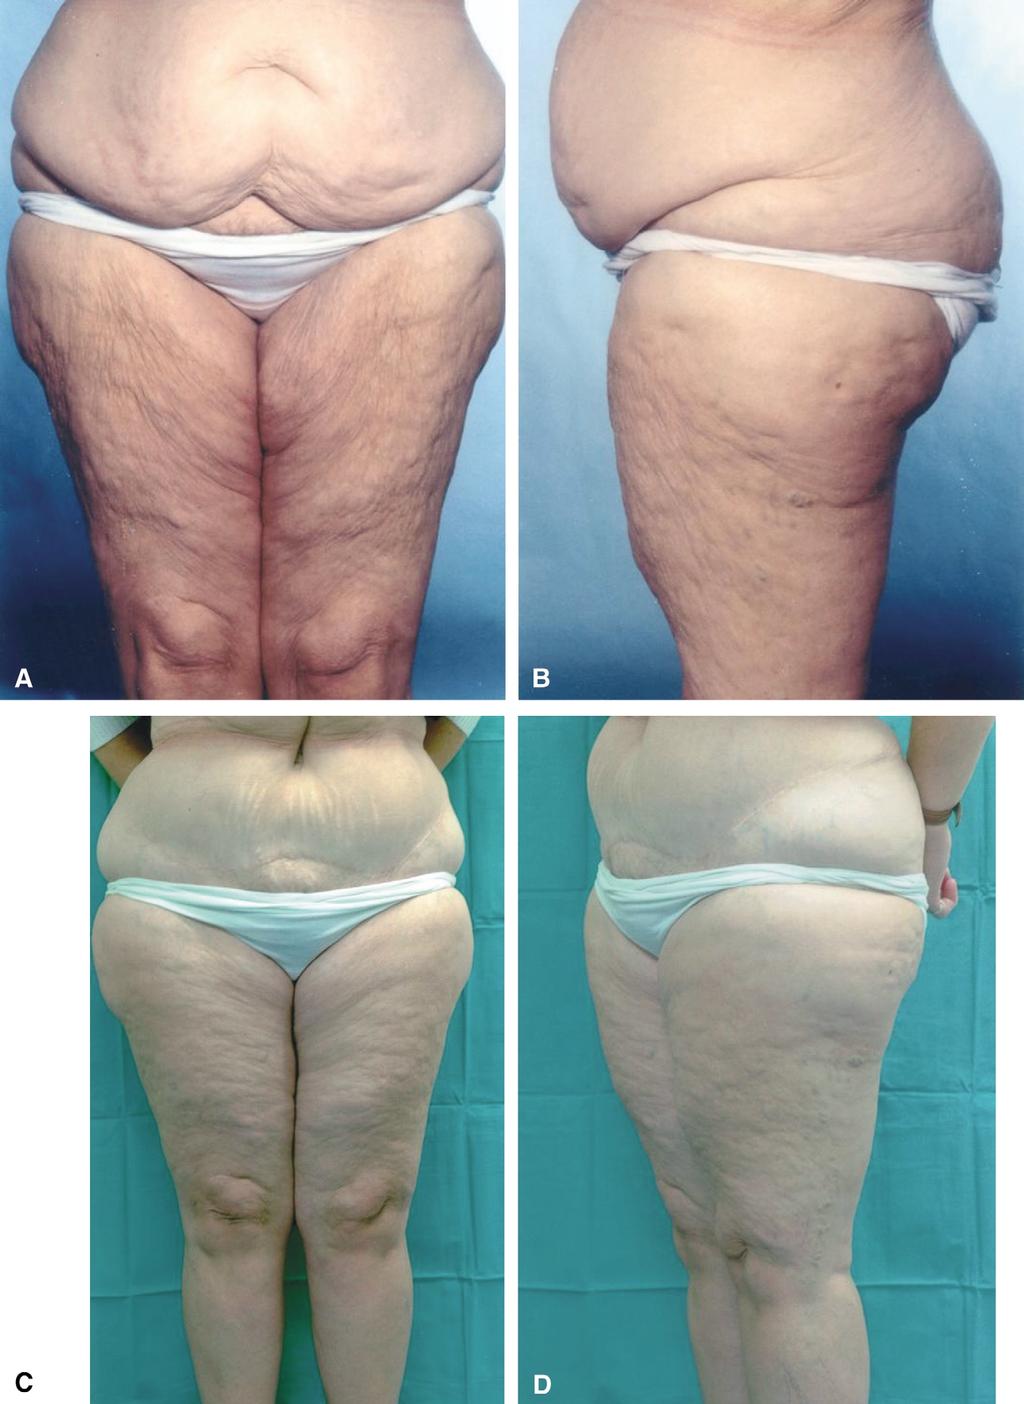 Body contouring by combined abdominoplasty and medial vertical thigh reduction